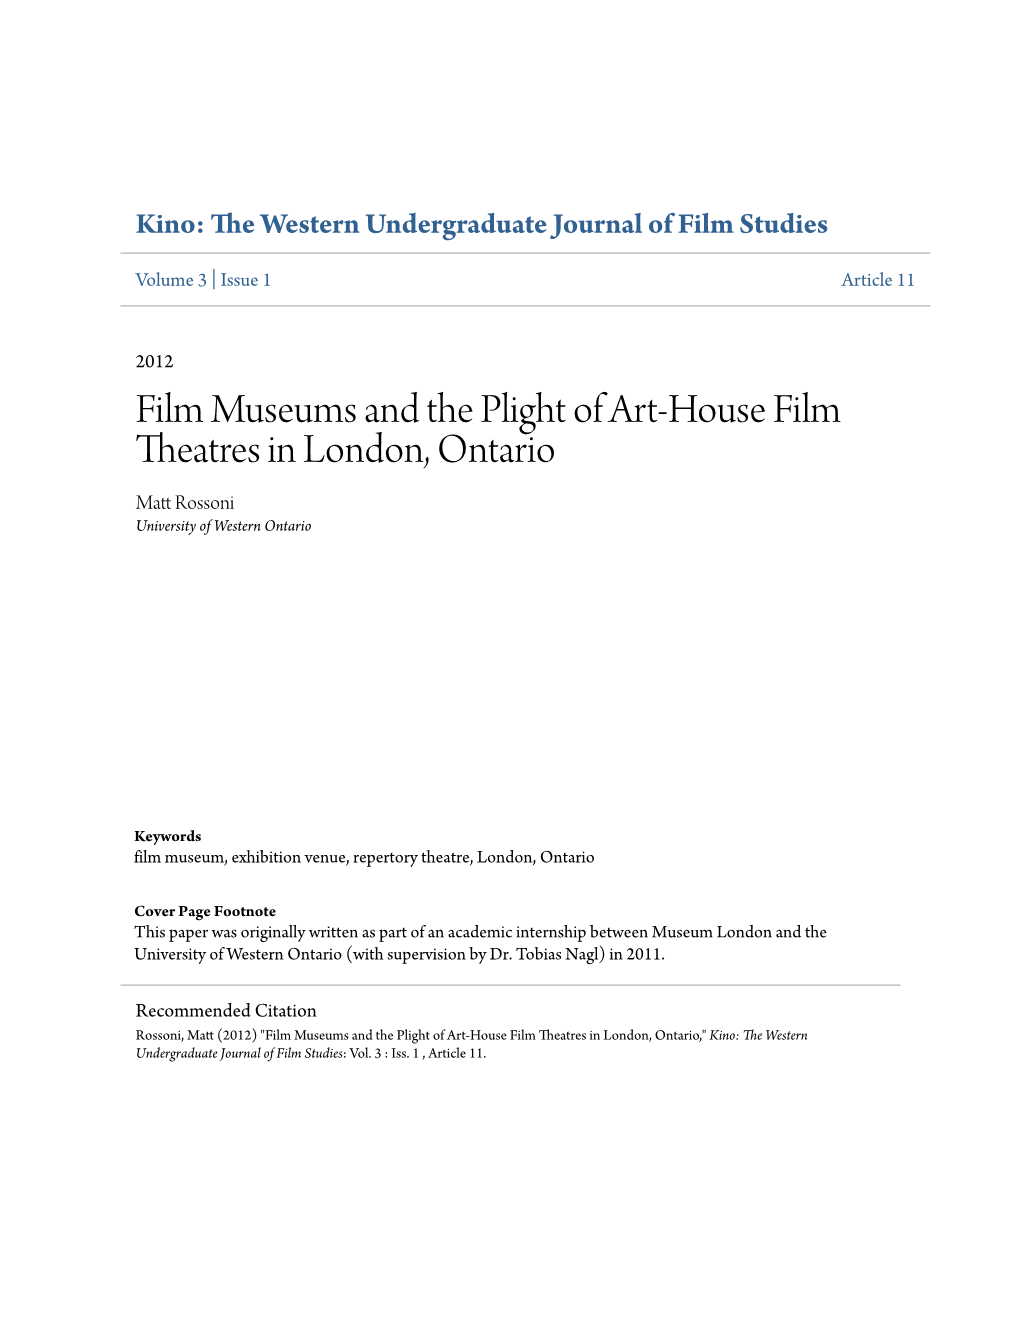 Film Museums and the Plight of Art-House Film Theatres in London, Ontario Matt Rossoni University of Western Ontario